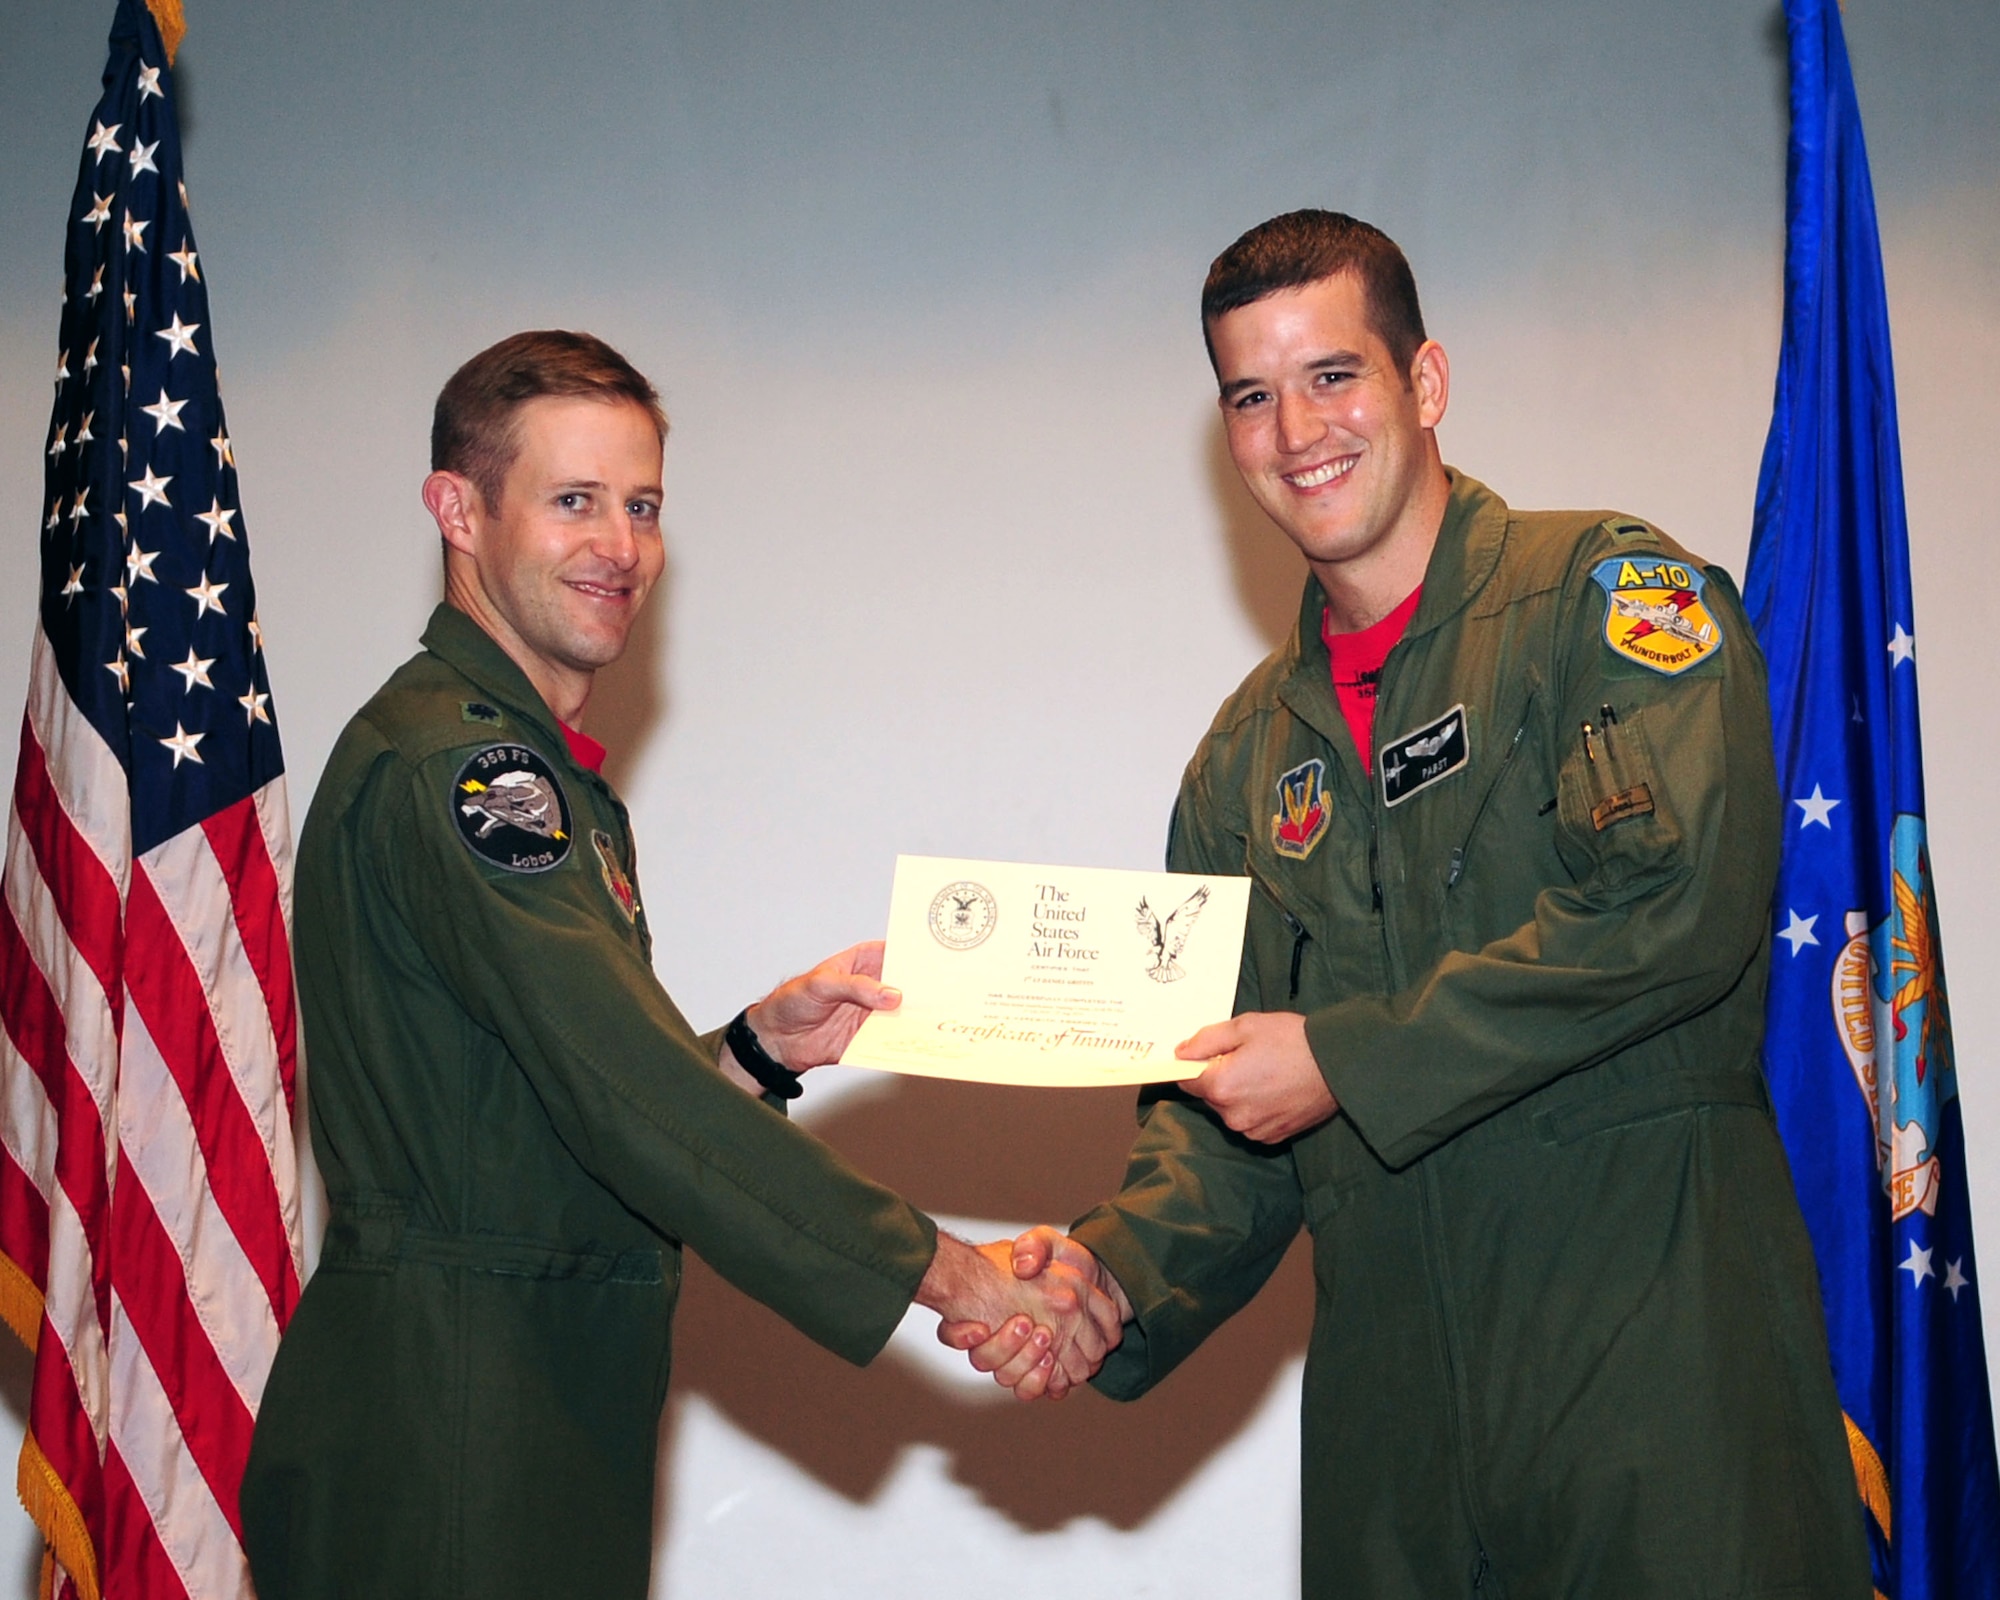 Lt. Col. Scott Campbell, 358th Fighter Squadron commander, presents a graduation certificate to 1st Lt. Dan Griffin, certifying his completion of the A-10C Pilot Initial Qualification Course Class 10-BBD at the base theater here Aug. 13, 2010. Lieutenant Griffin was one of 12 students to most recently complete the 27-week training course, becoming the Air Force’s newest A-10C pilots. (U.S. Air Force photo/Airman 1st Class Jerilyn Quintanilla)